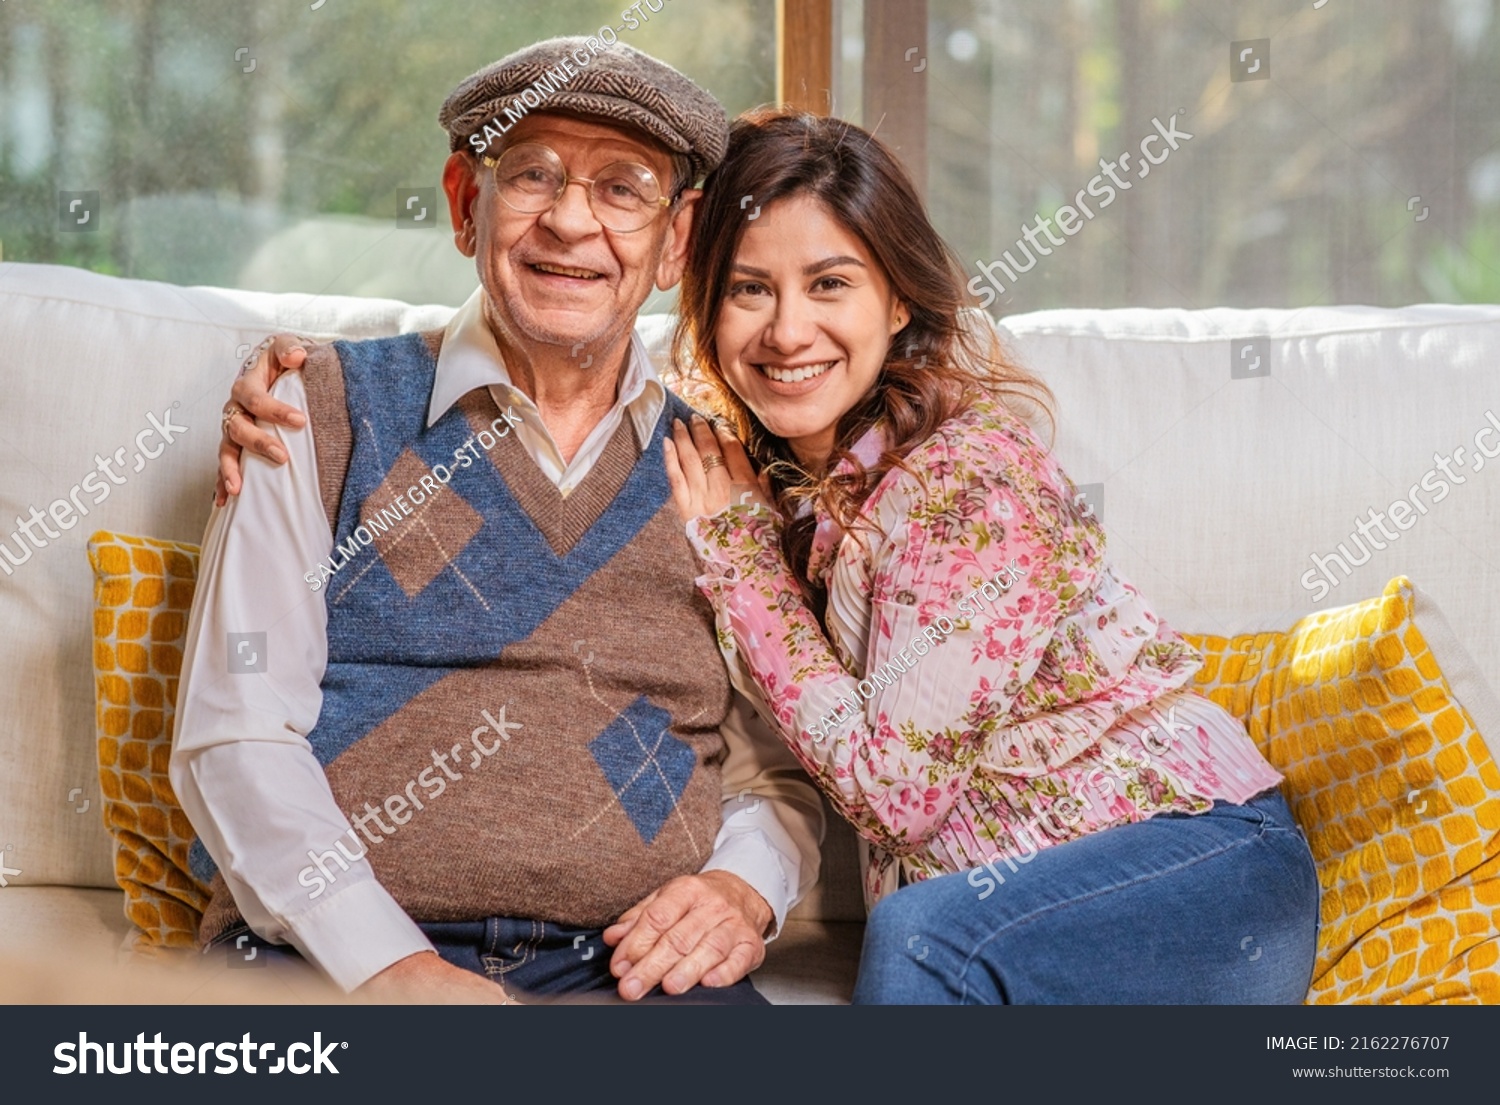 Portrait of beautiful Latin woman hugging her older father smiling and looking at camera. #2162276707